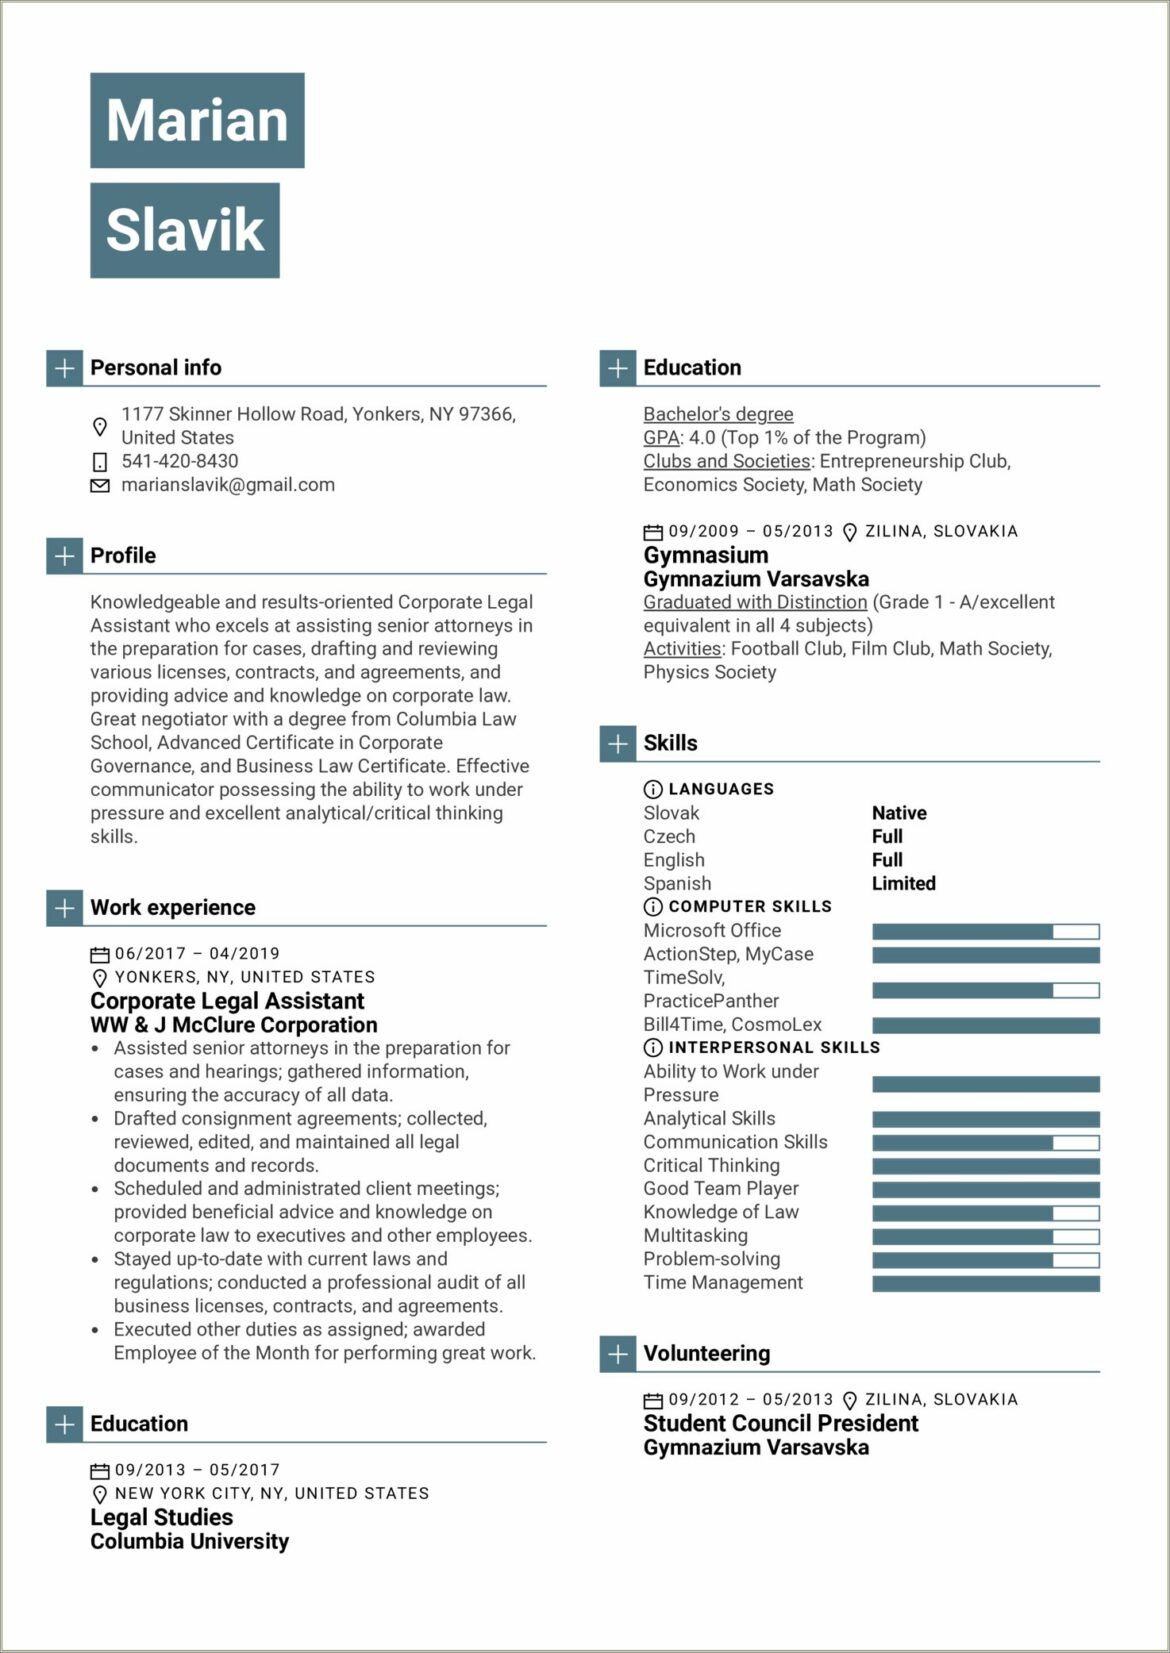 Sample Resumes For A New Paralegal